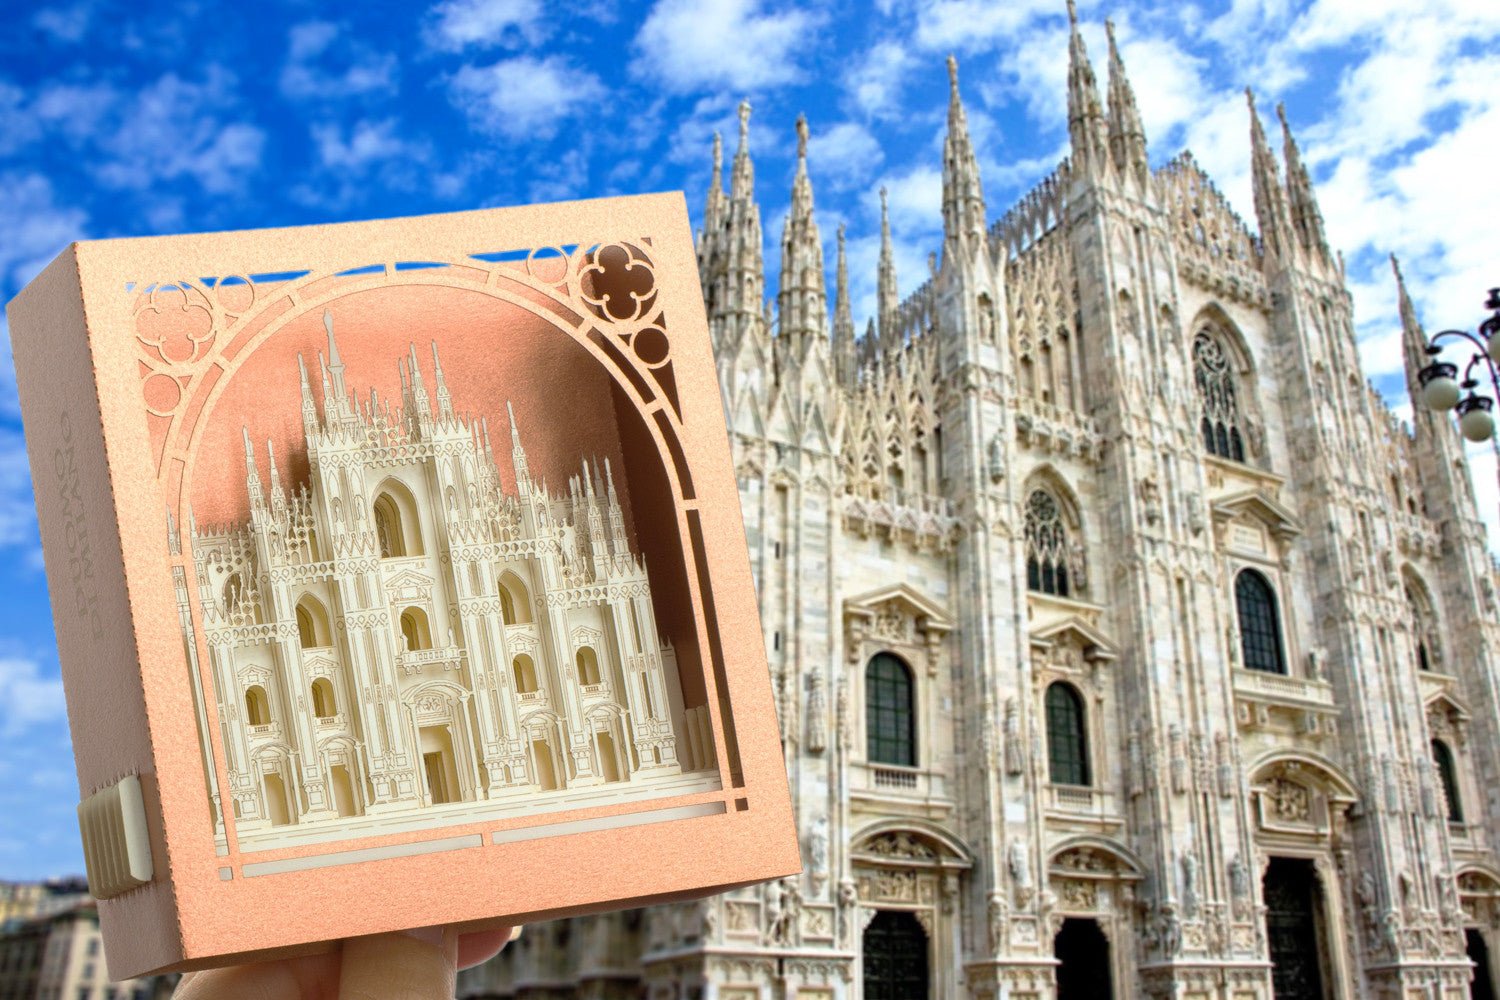 The Milan Cathedral, Milan, Italy pop-up card - ColibriGift